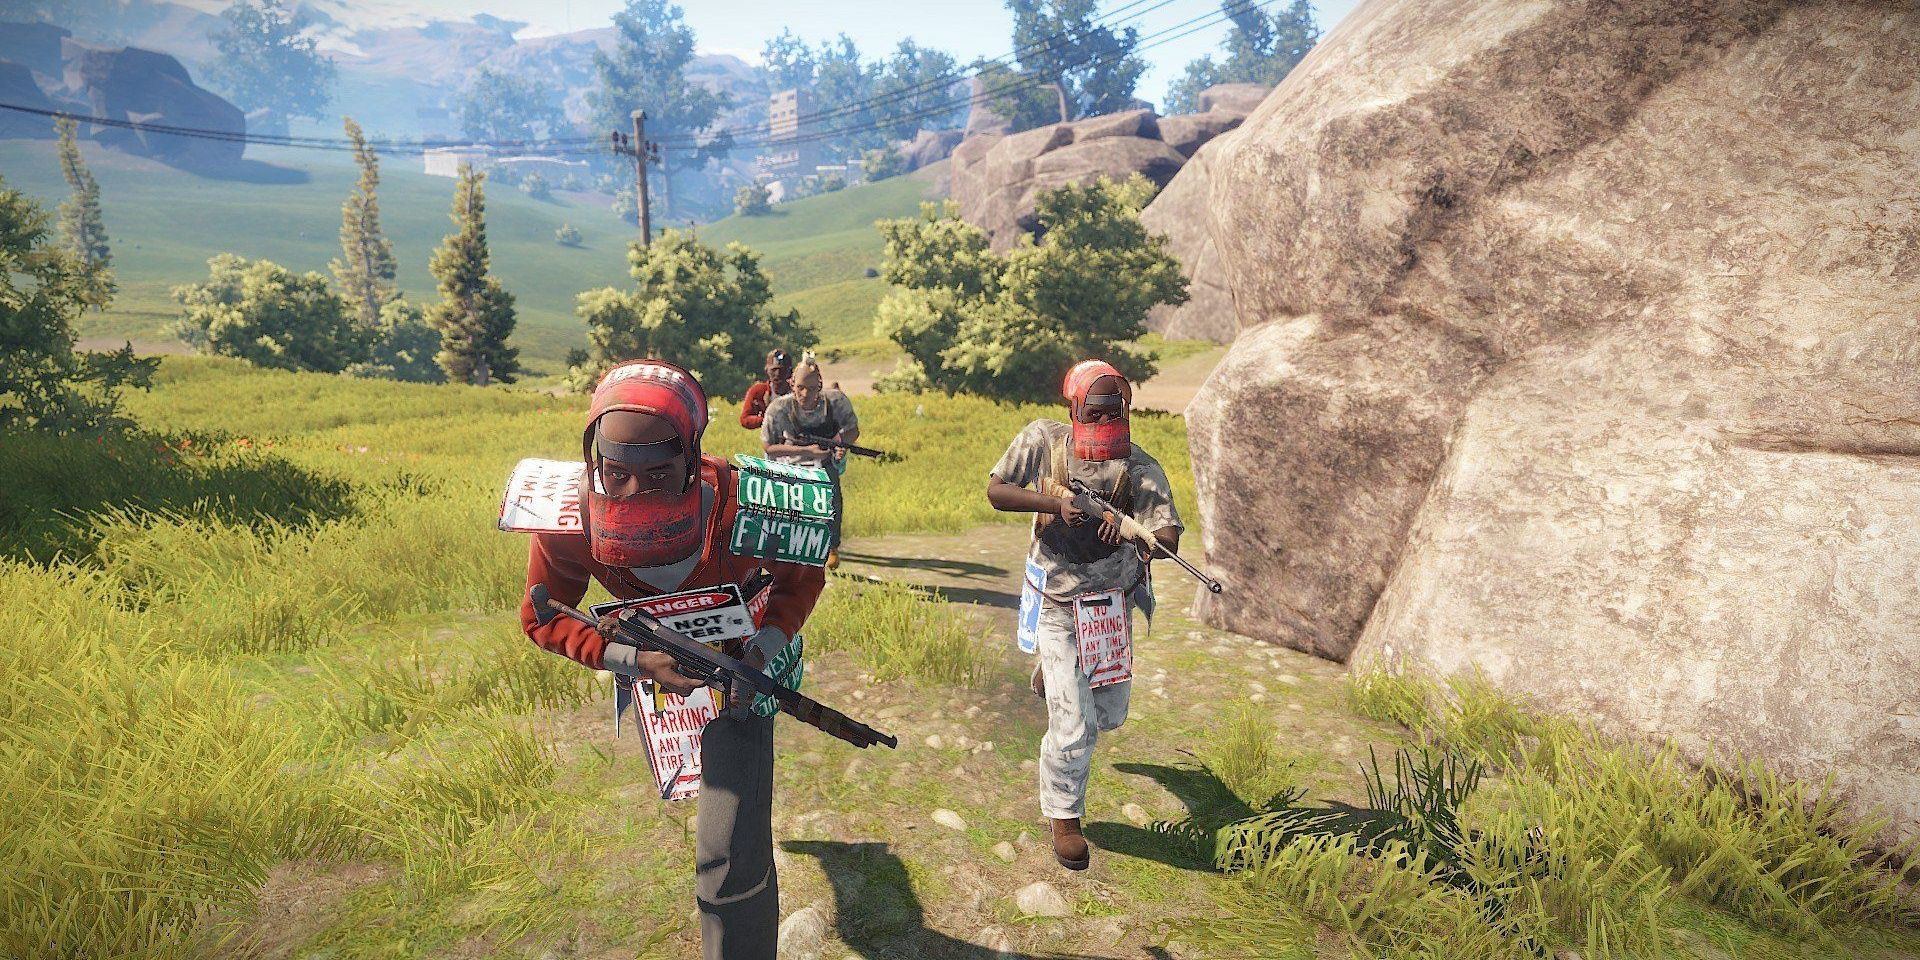 Players dressed in post apocalyptic gear made out of scrap rush past a boulder in the survival game Rust